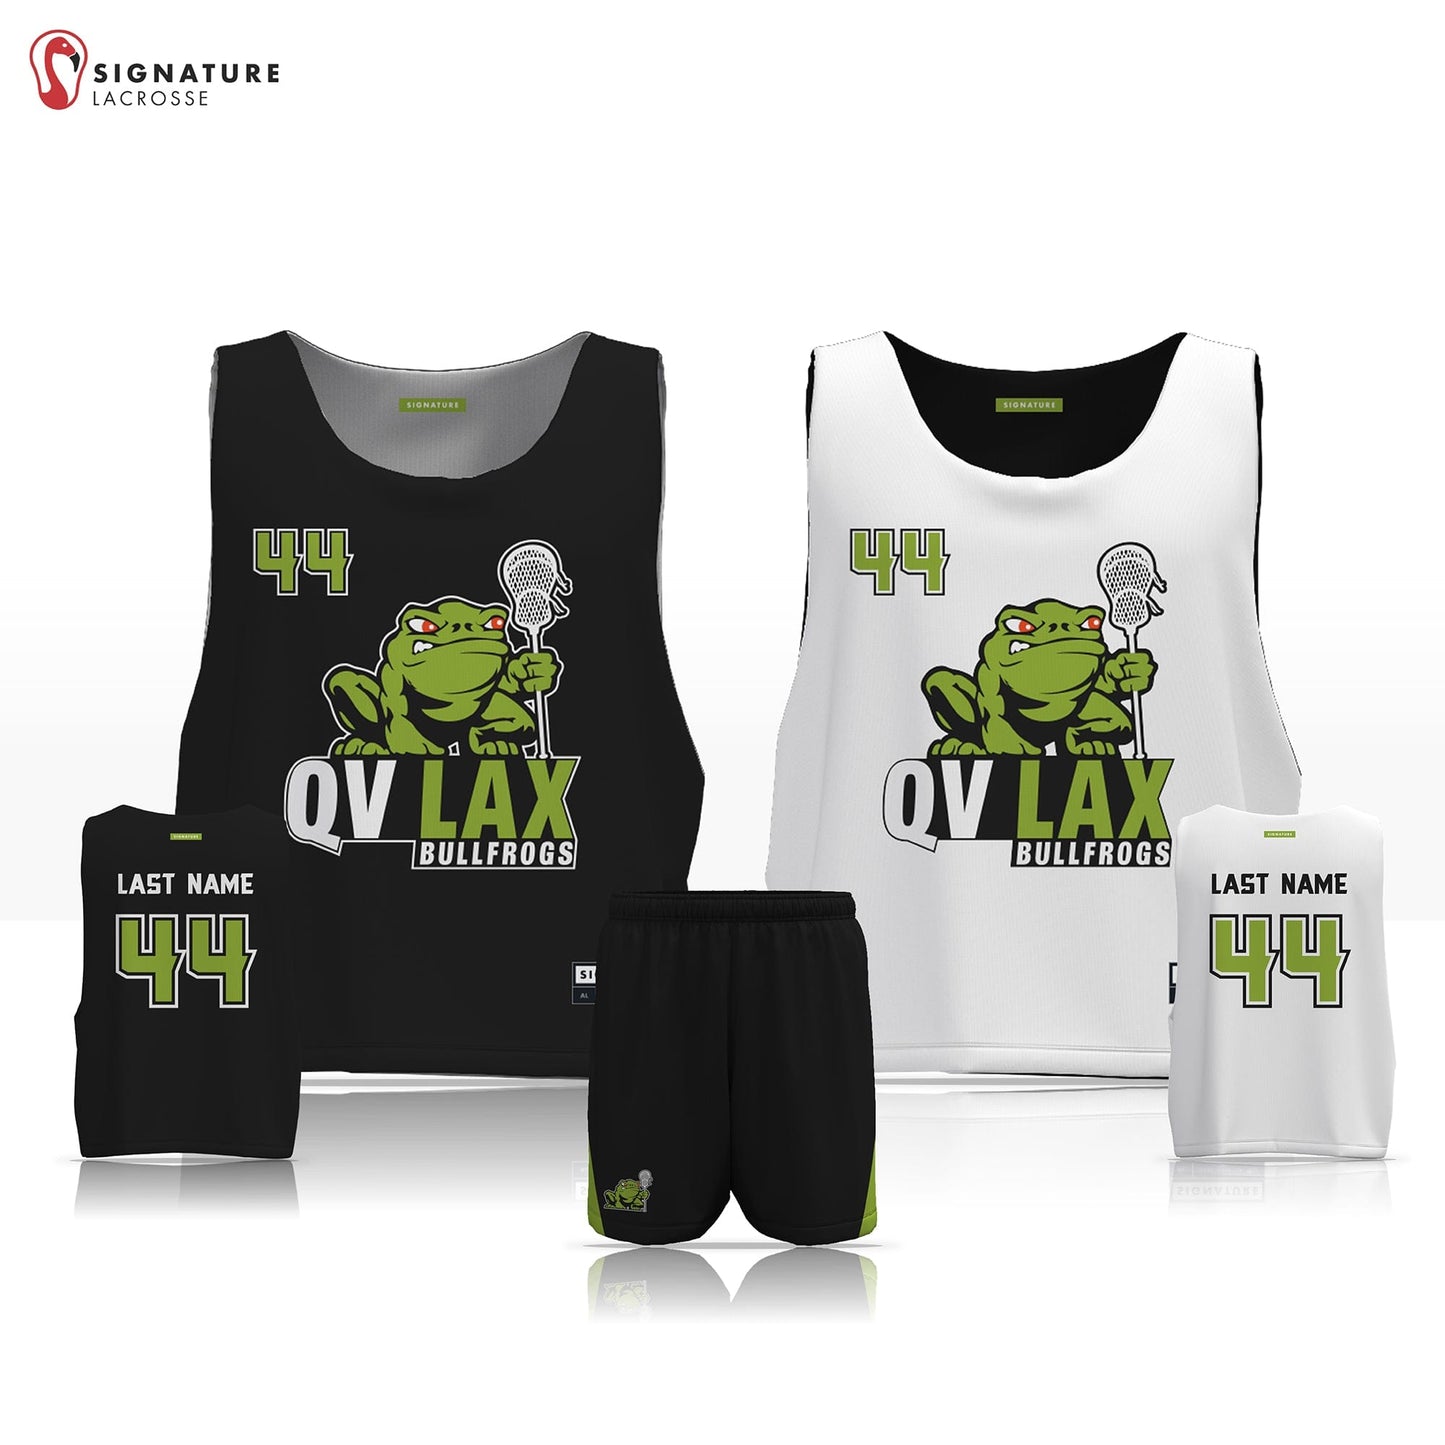 Quinebaug Valley Youth Lacrosse Men's 2 Piece Player Game Package: Quinebaug Signature Lacrosse